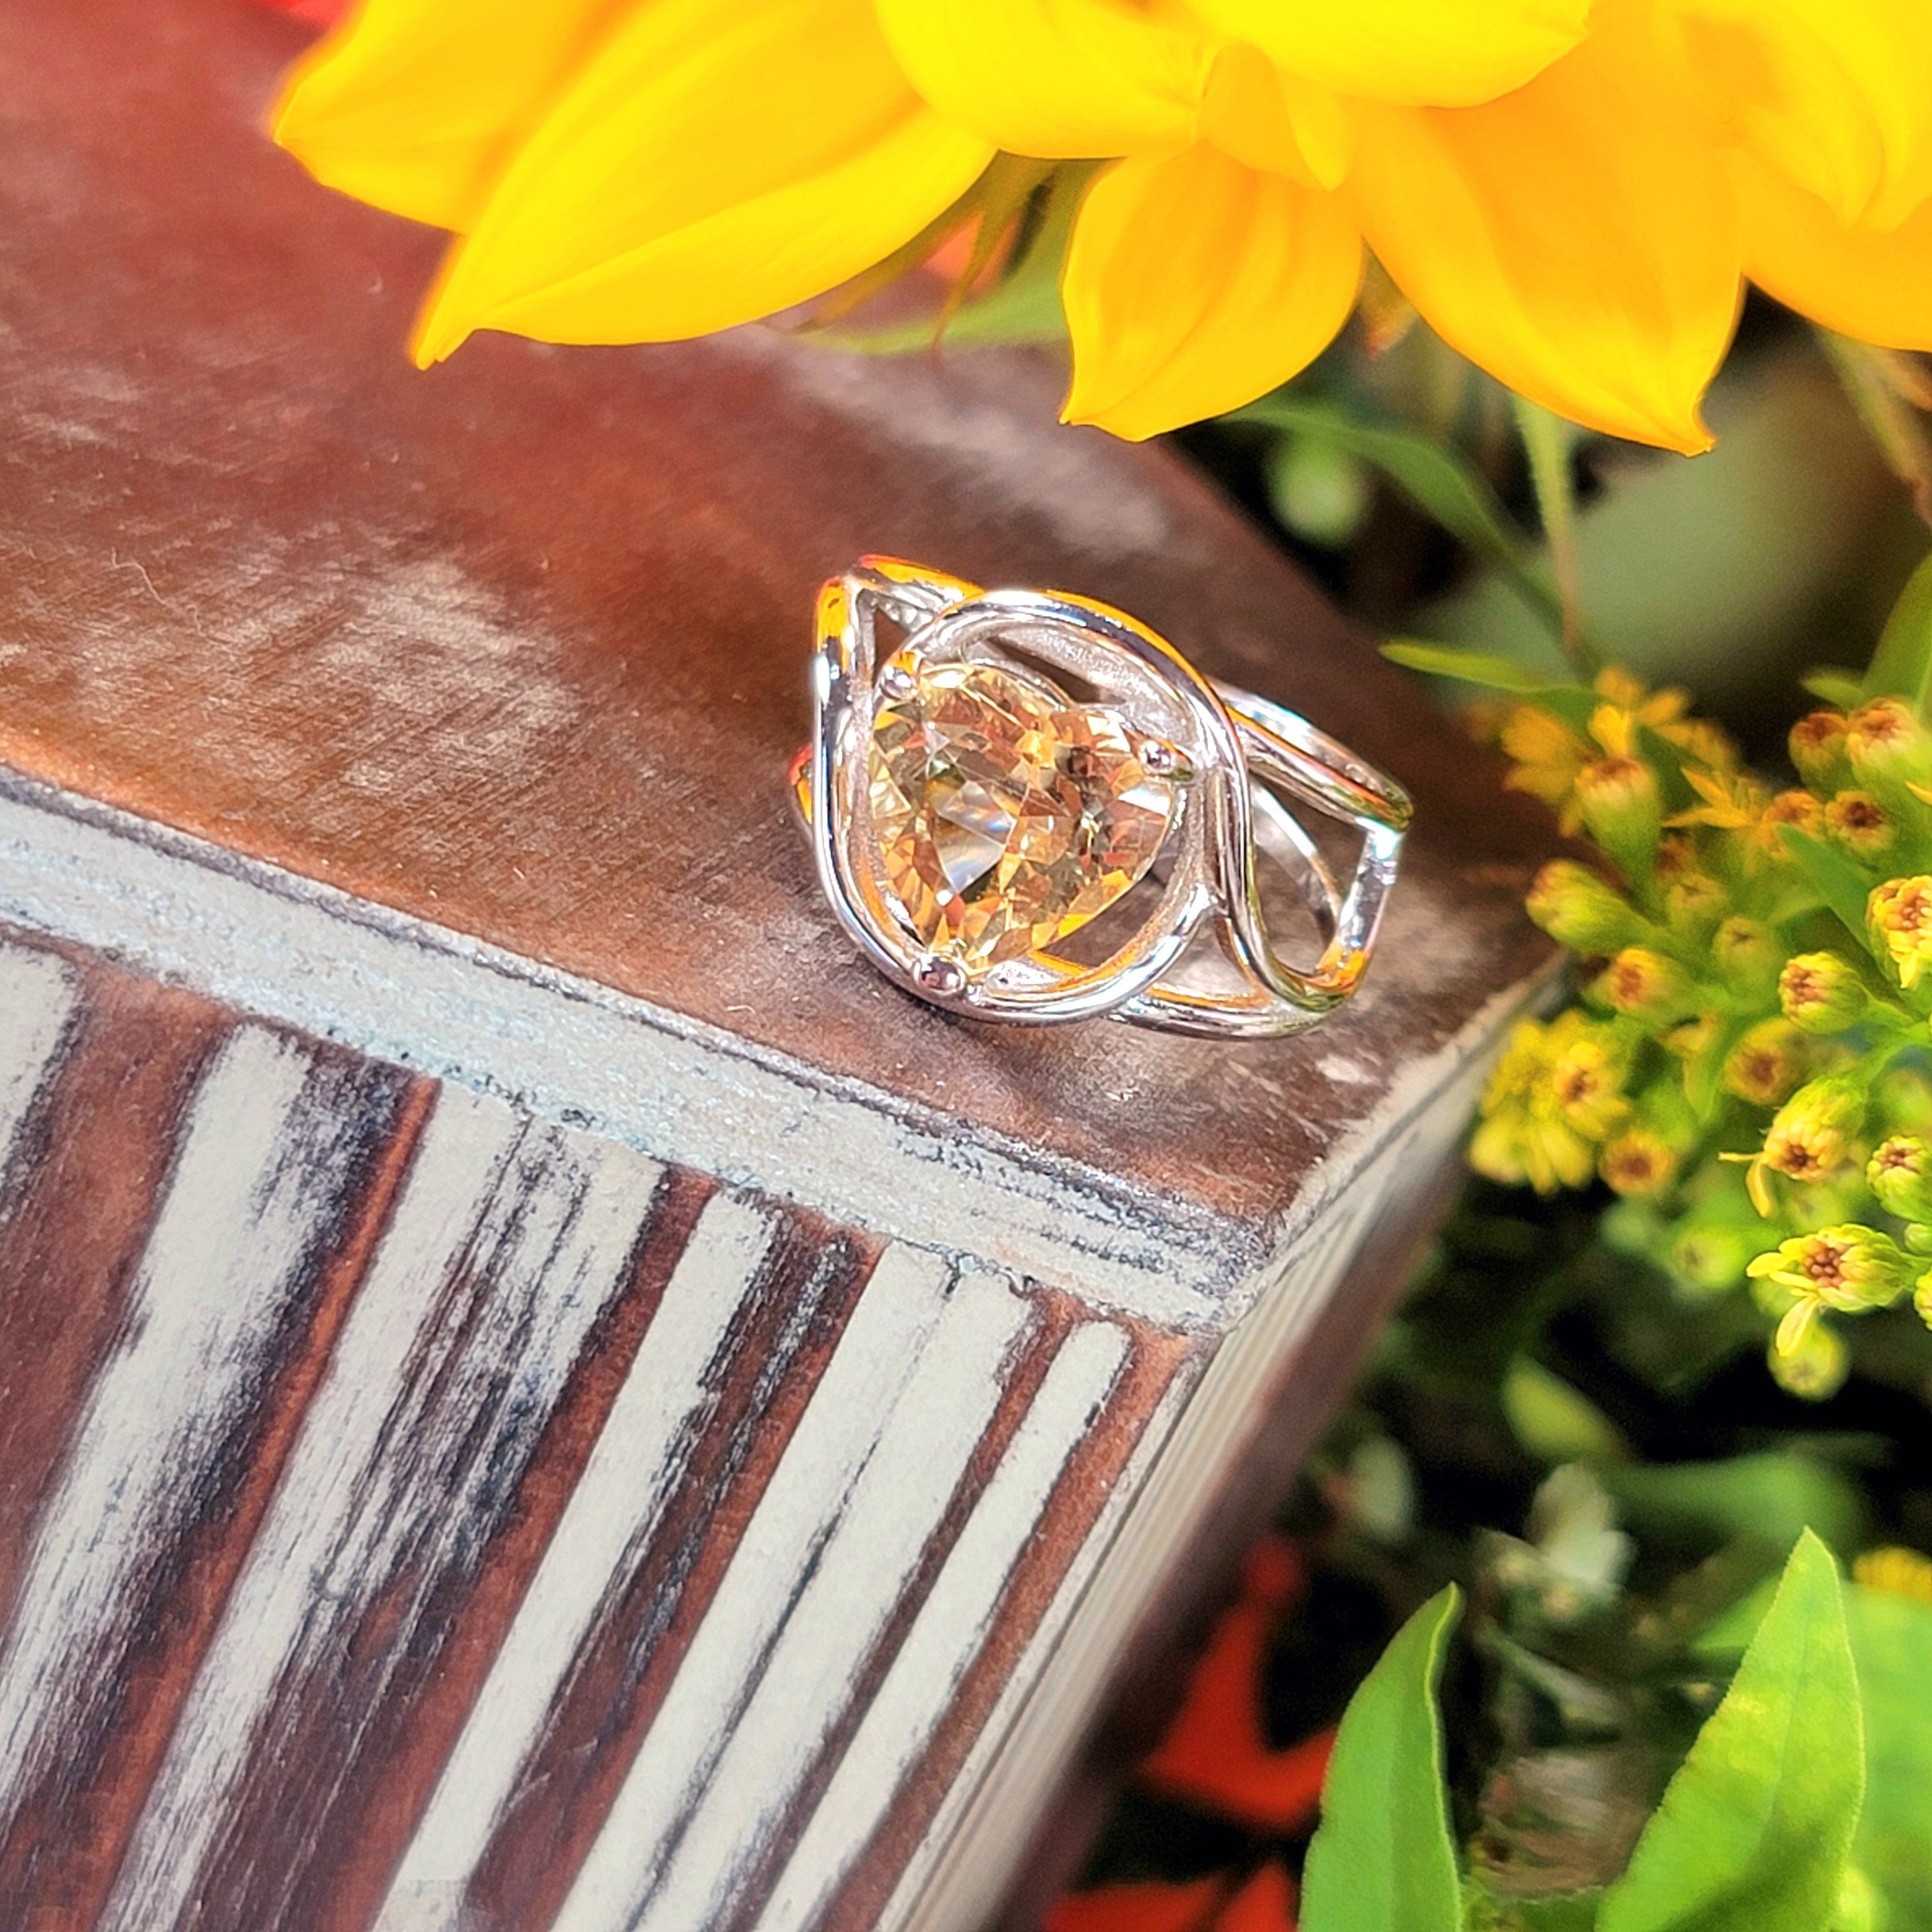 Citrine Heart Adjustable Finger Cuff Ring .925 Silver for Abundance, Good Luck and Positivity